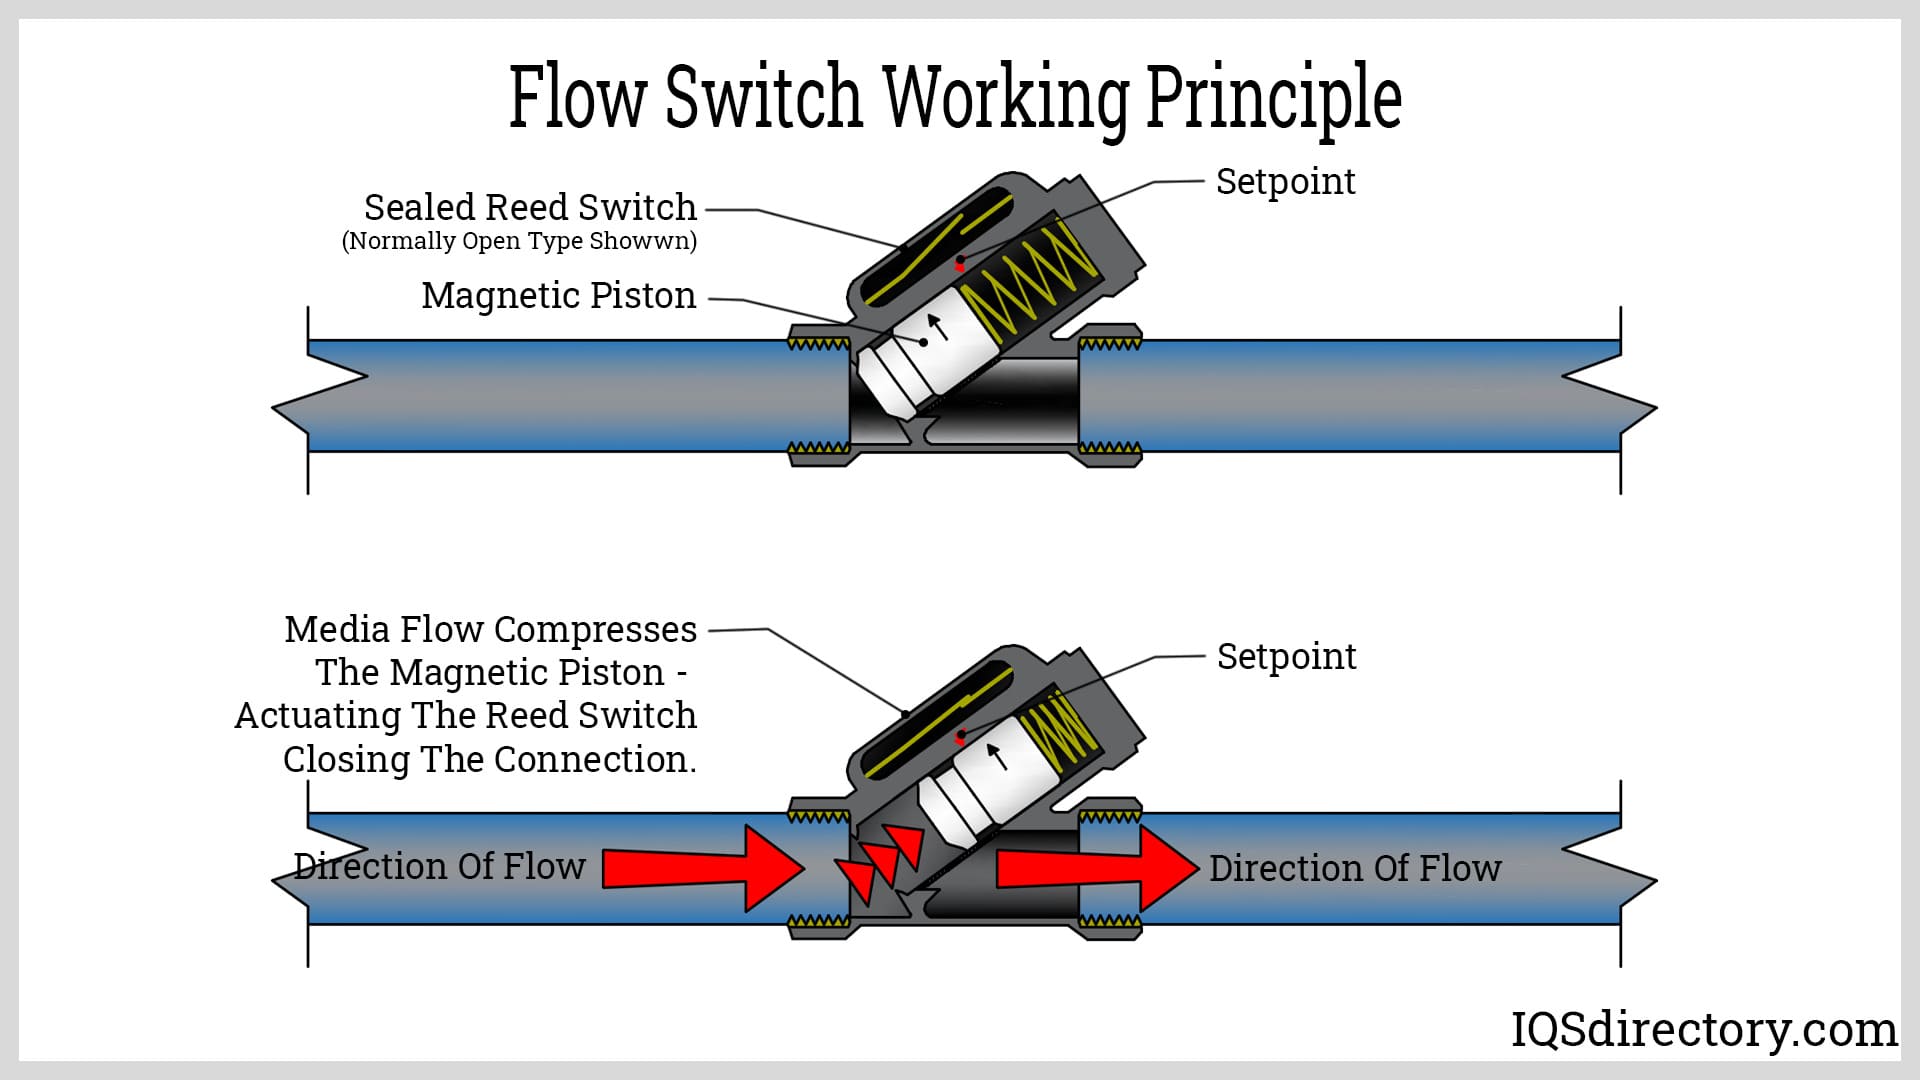 Flow Switch Working Principle